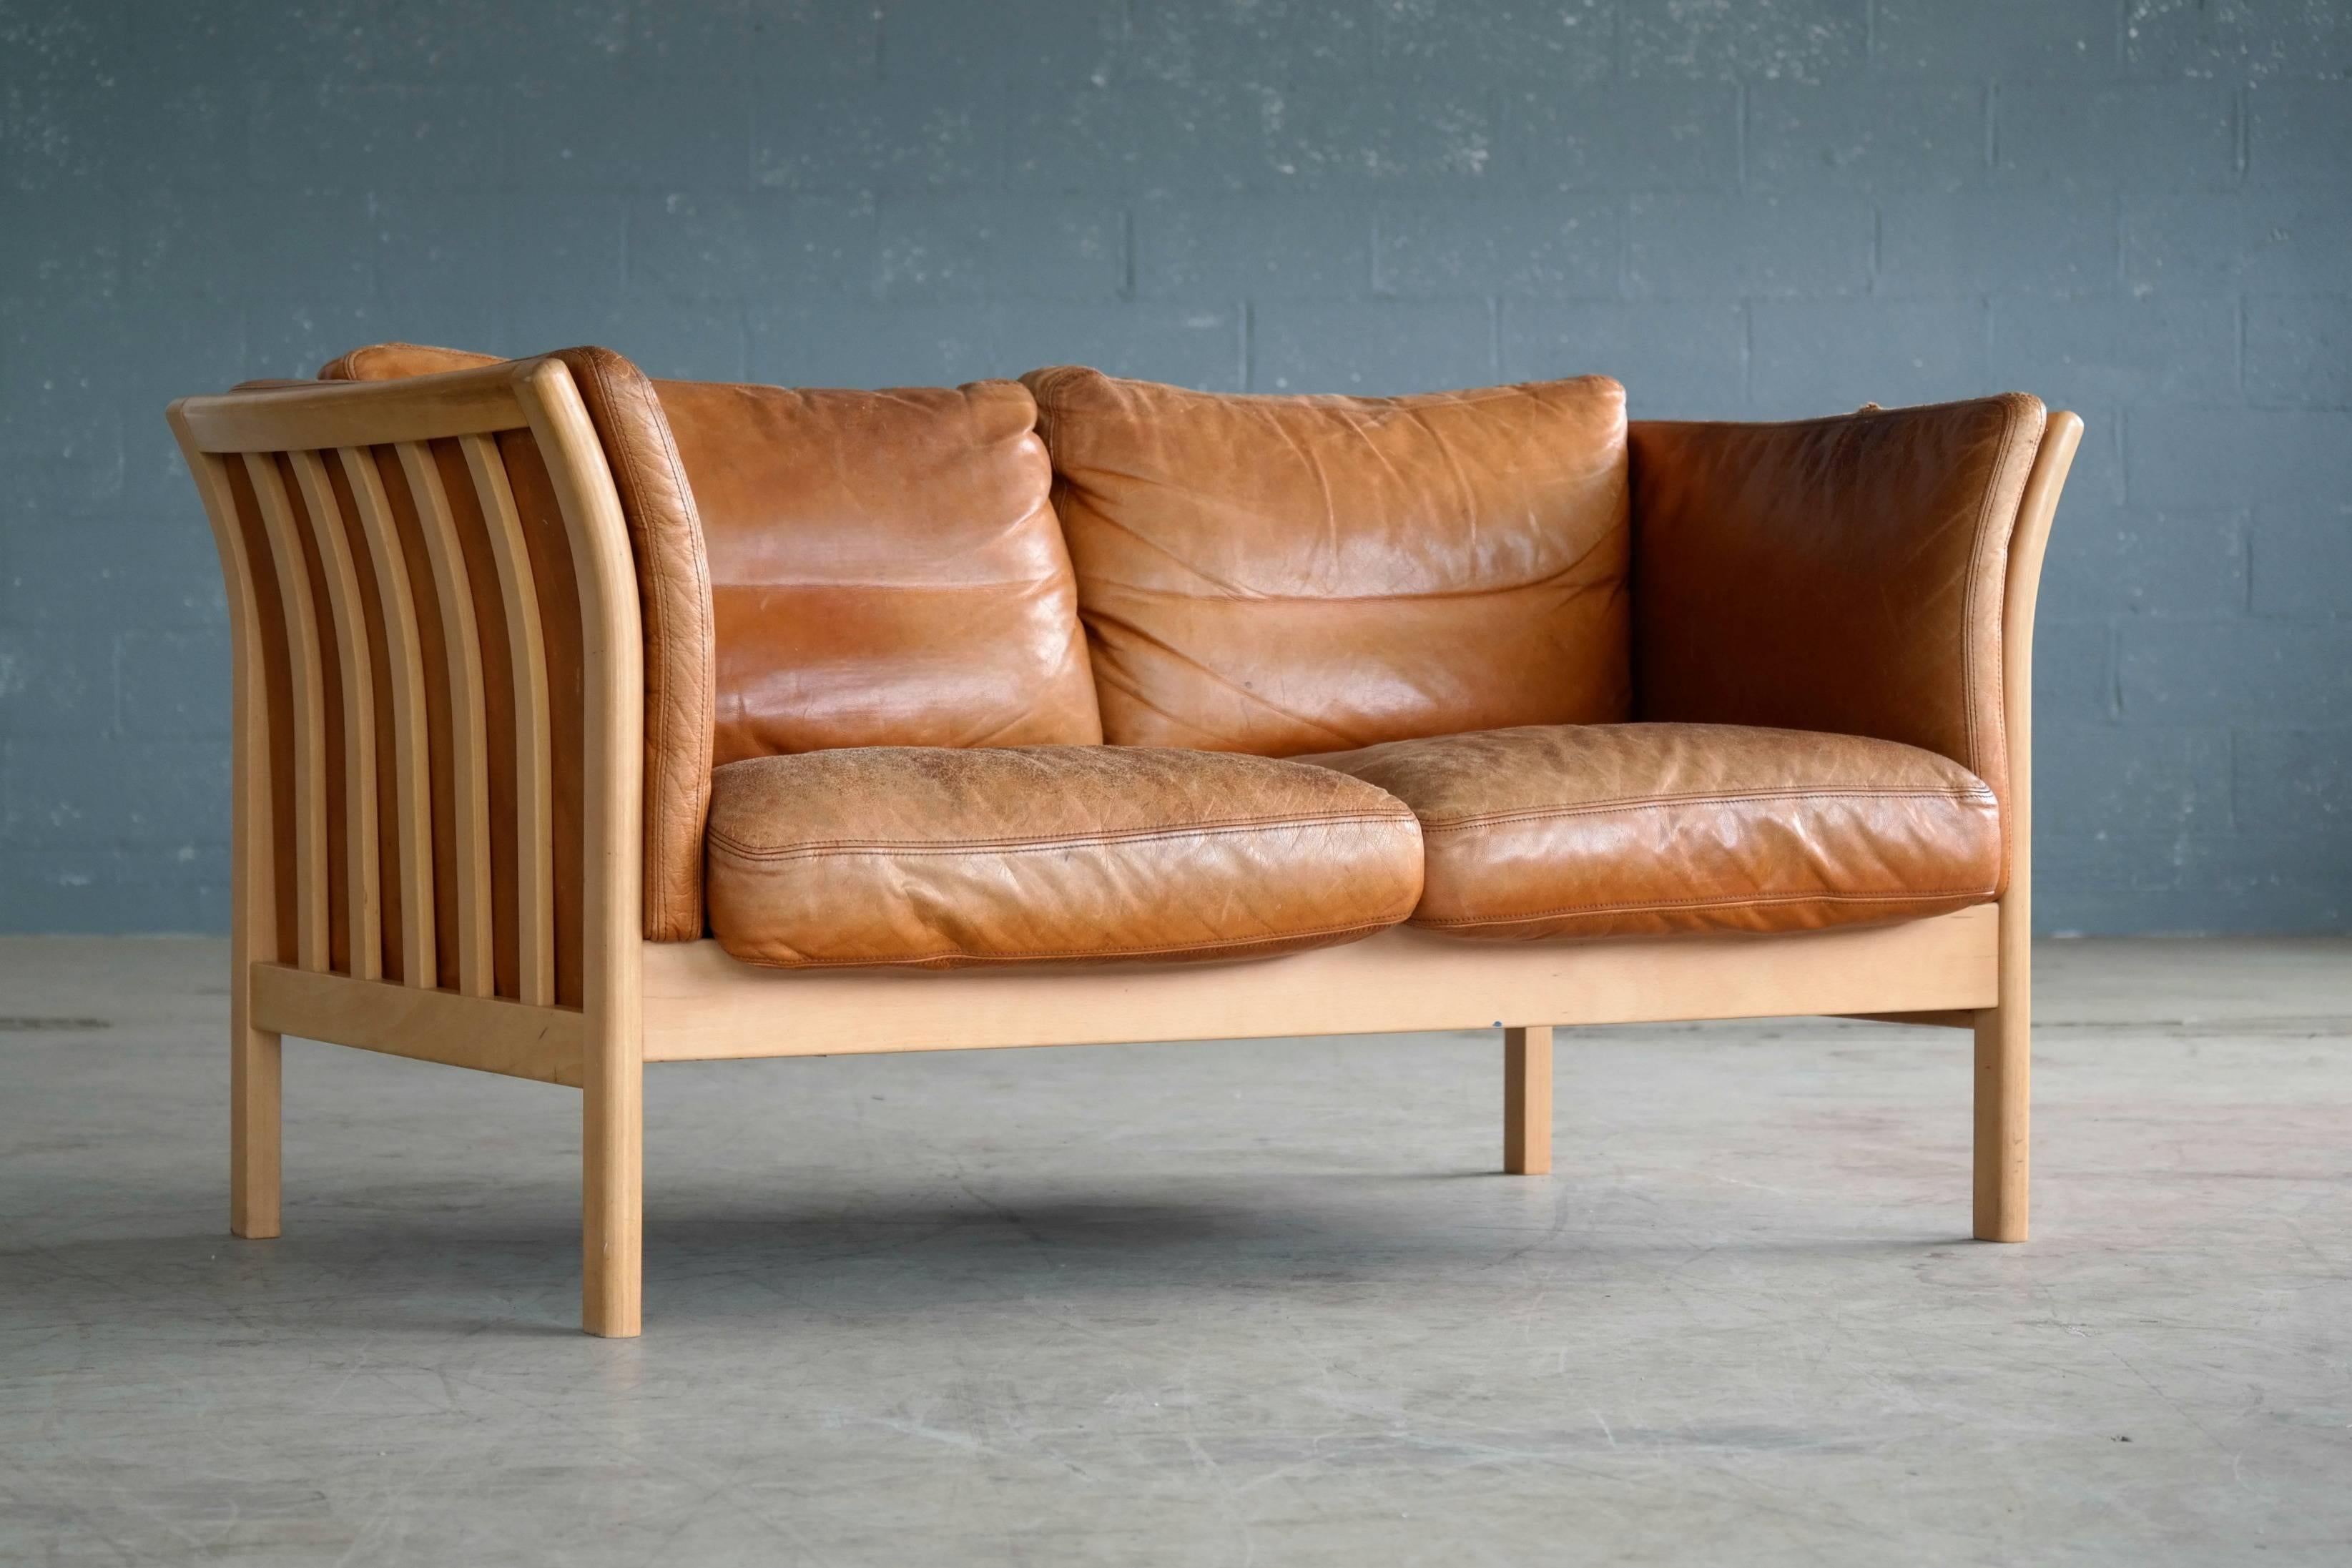 Very nice Danish 1960s two-seat with cognac colored leather and traditional Scandinavian blond beechwood frame with spokes on the sides in the style of Børge Mogensen. Admirable patina and wear with some crazing to the top of the armrests and a